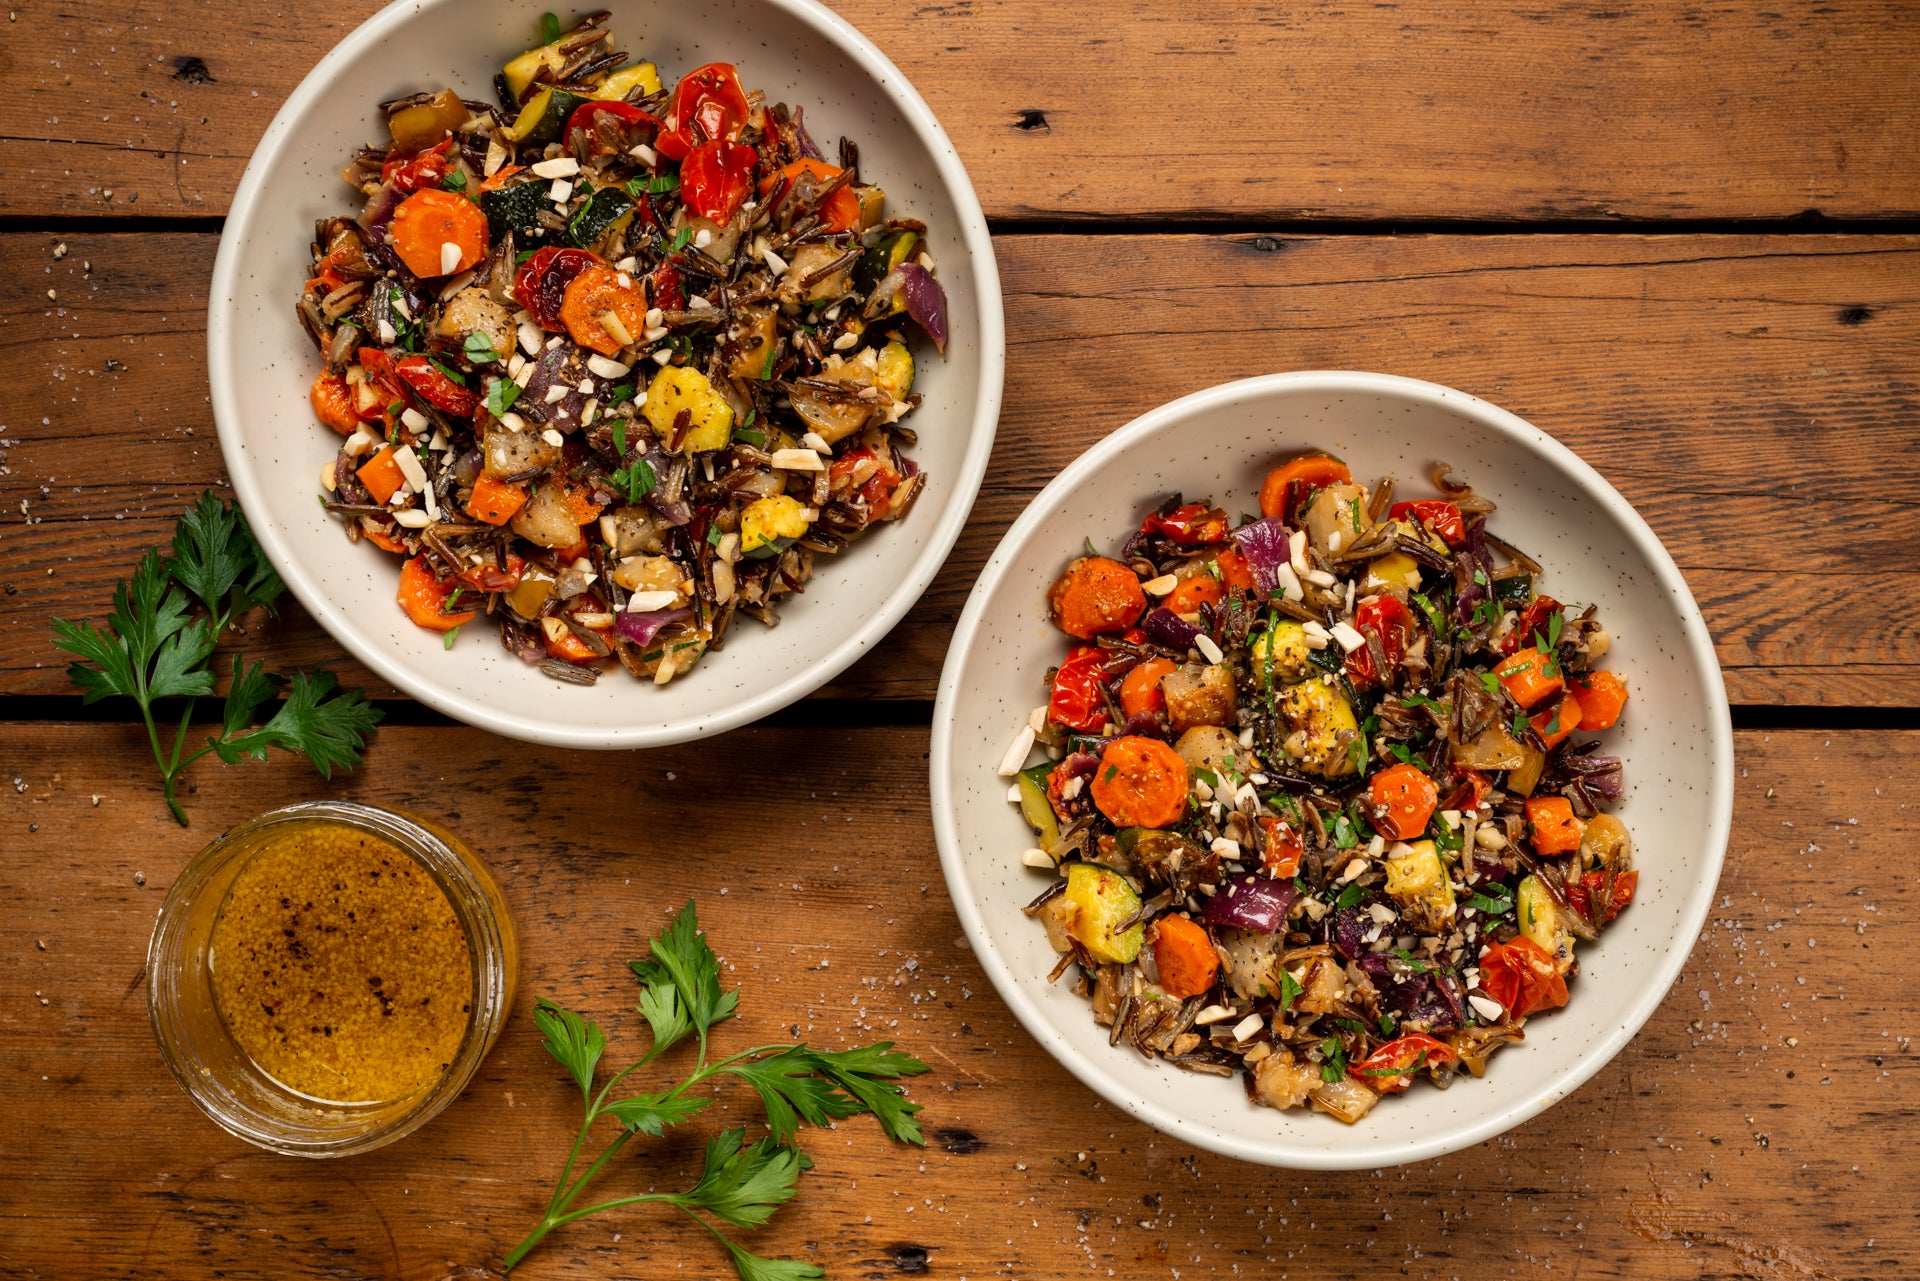 Using Wabanaki Maple barrel aged bourbon maple syrup, pictured is a wild rice salad with roasted vegetables